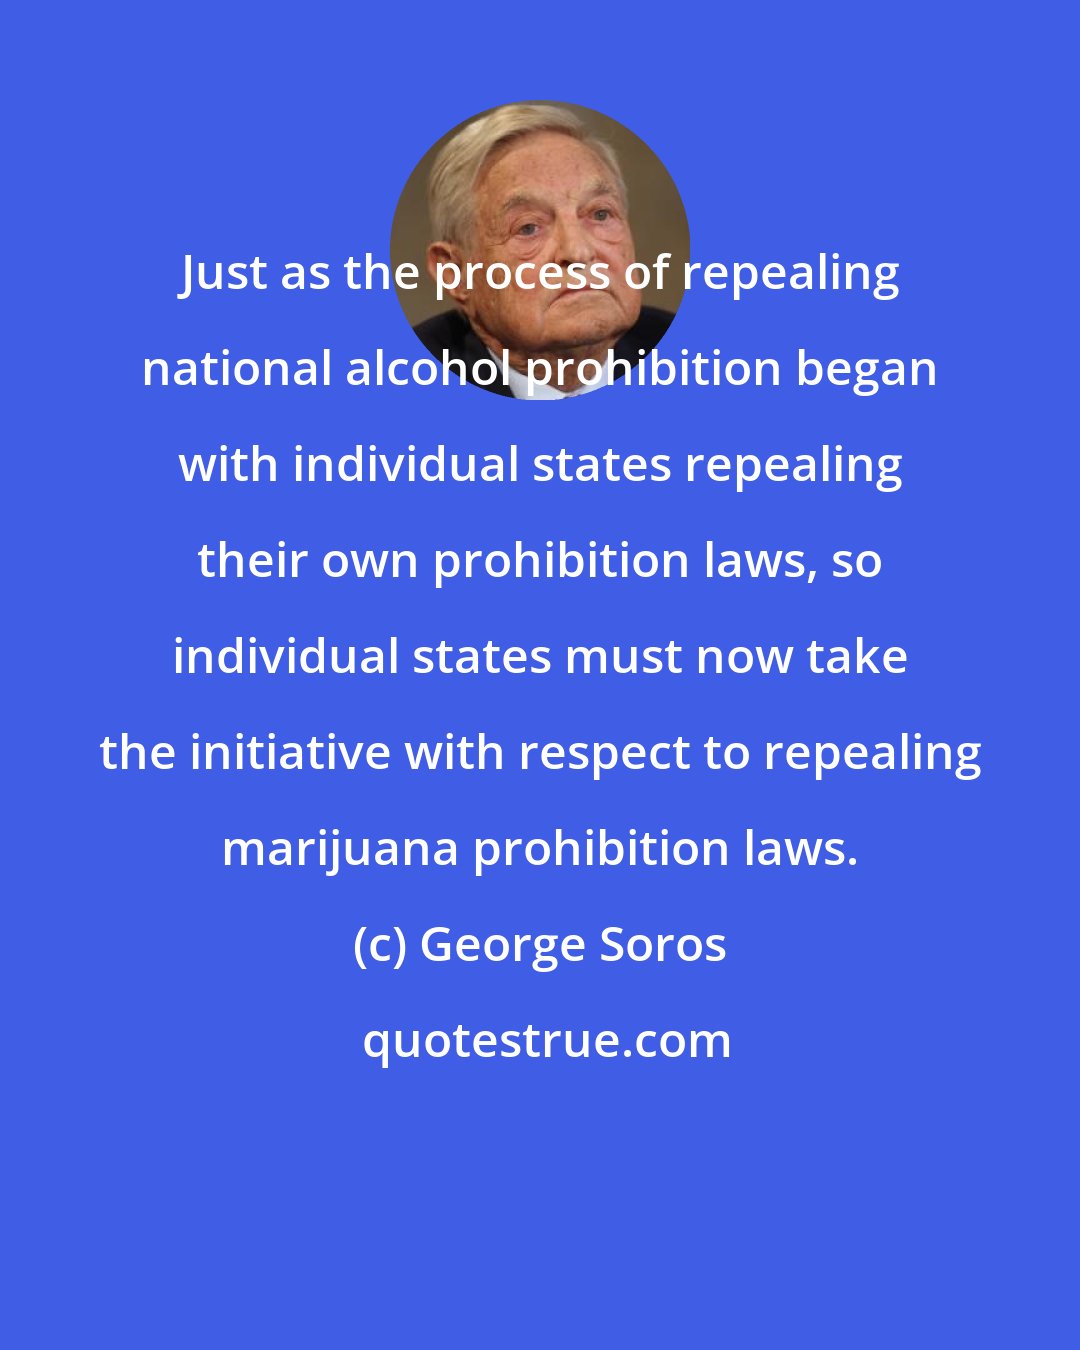 George Soros: Just as the process of repealing national alcohol prohibition began with individual states repealing their own prohibition laws, so individual states must now take the initiative with respect to repealing marijuana prohibition laws.